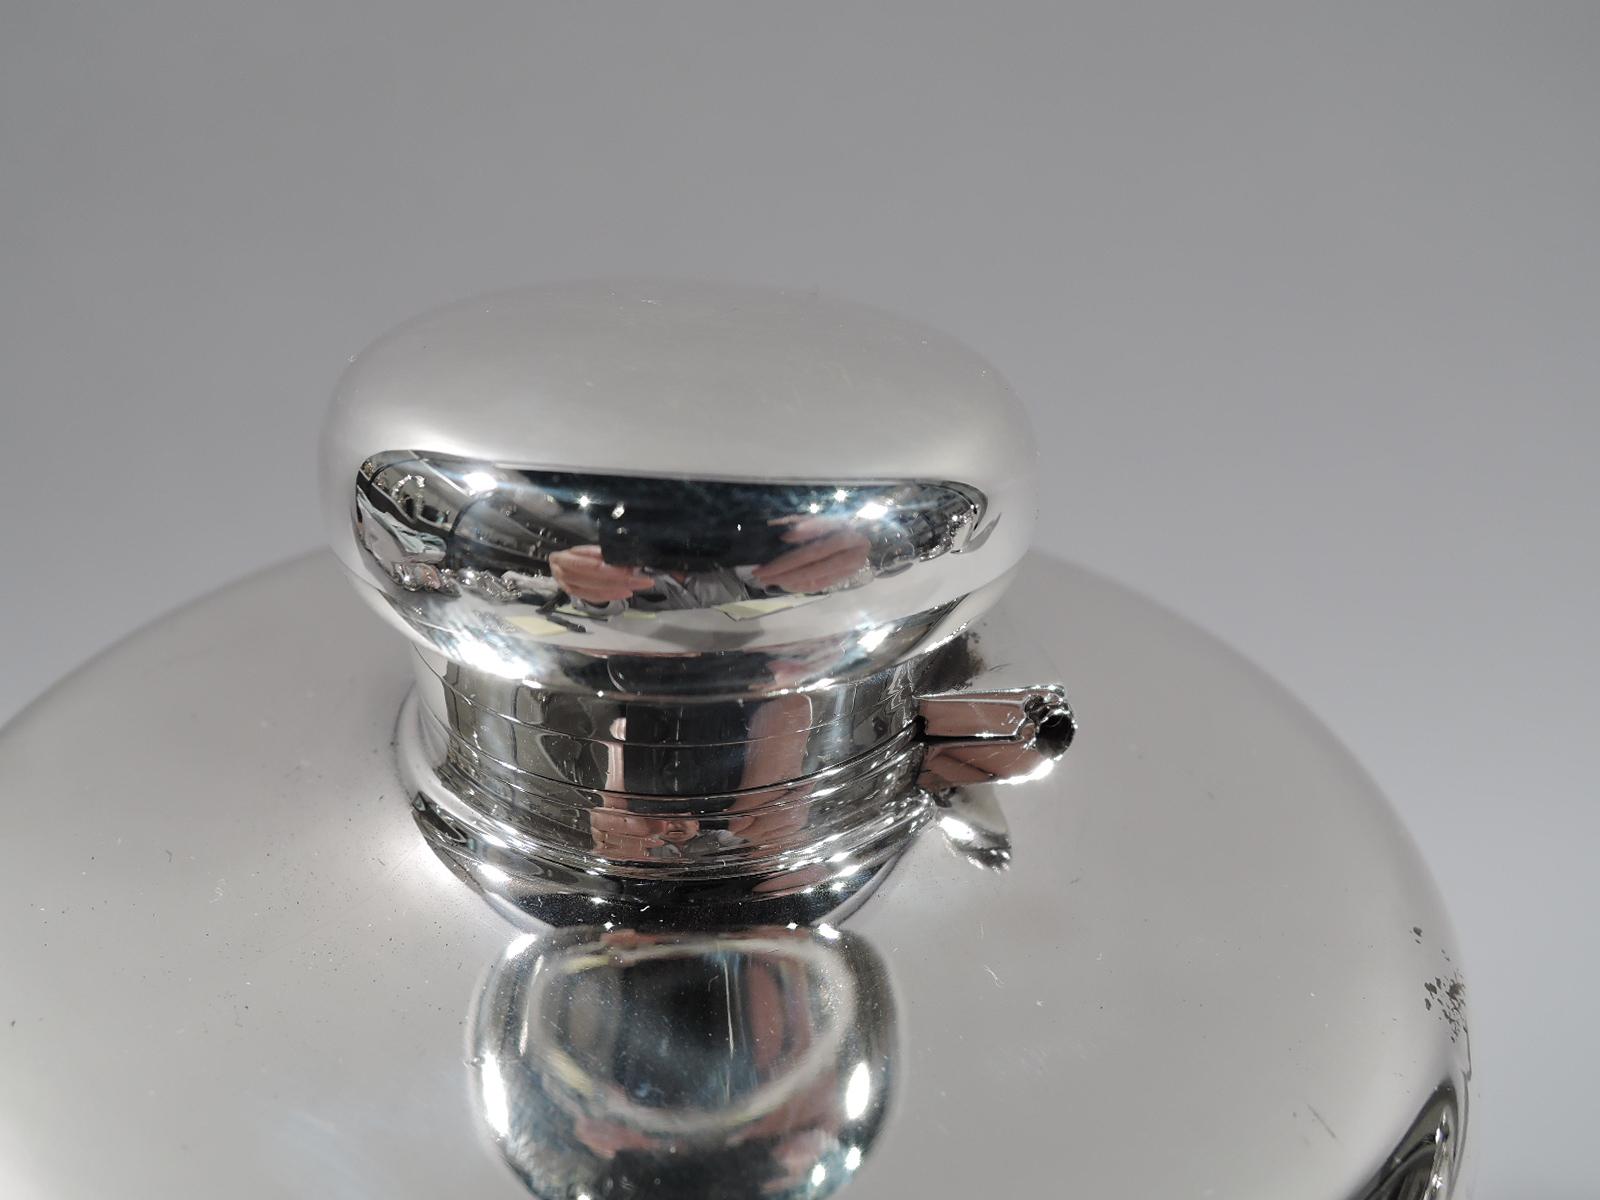 Large and unusual sterling silver flask. Made by Tiffany & Co. in New York, circa 1910. Truncated cone; gently curved and overhanging top with hinged and cork-lined bun cover. A big game-era vessel for passing around the campfire. Wide hand span